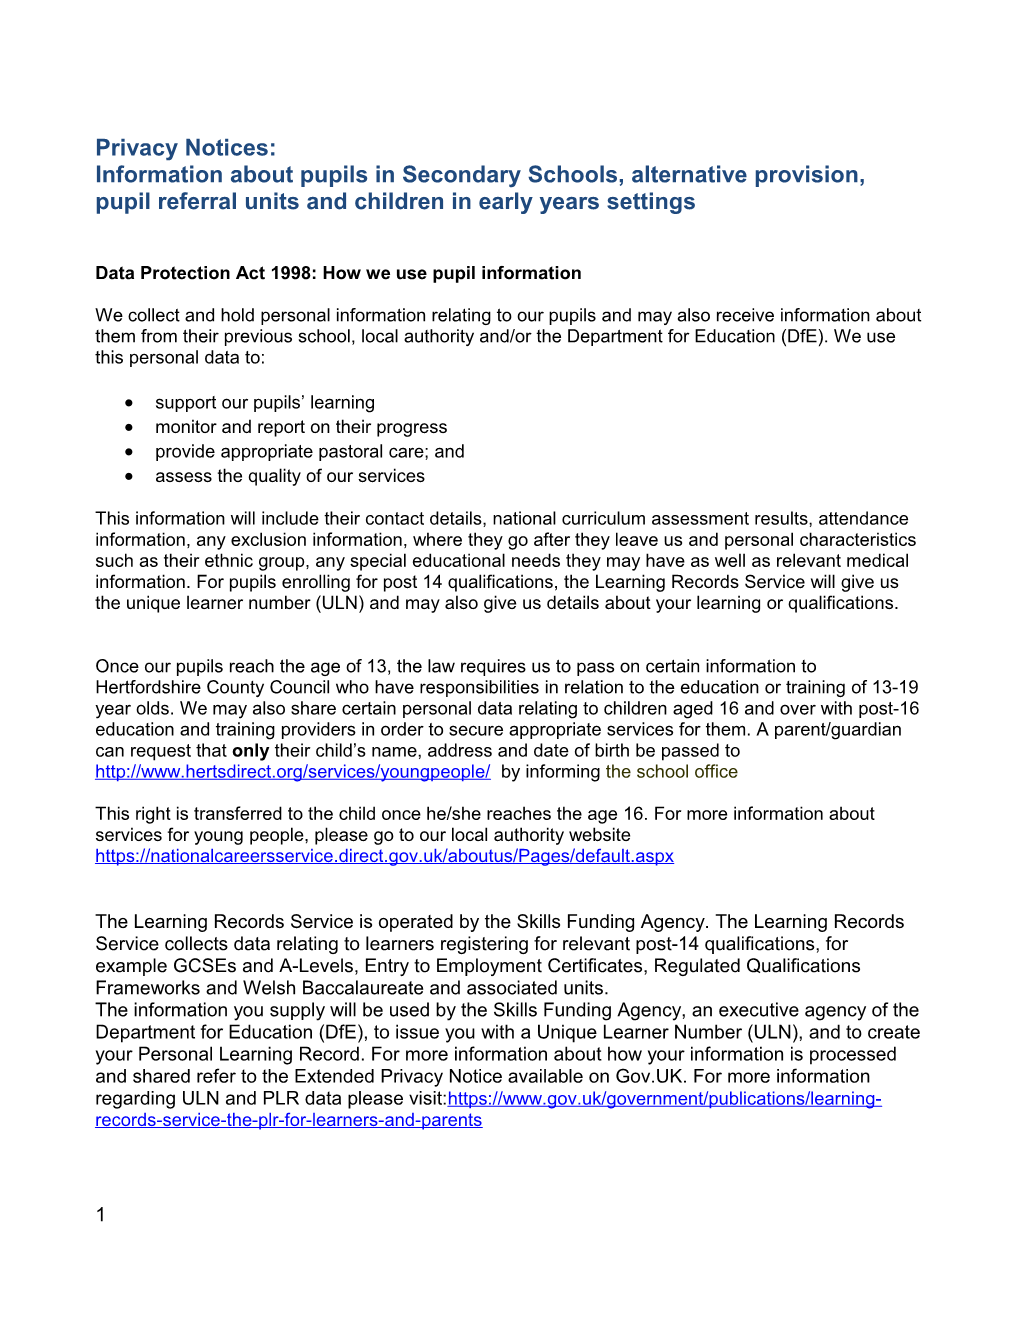 Information About Pupils in Secondary Schools, Alternative Provision